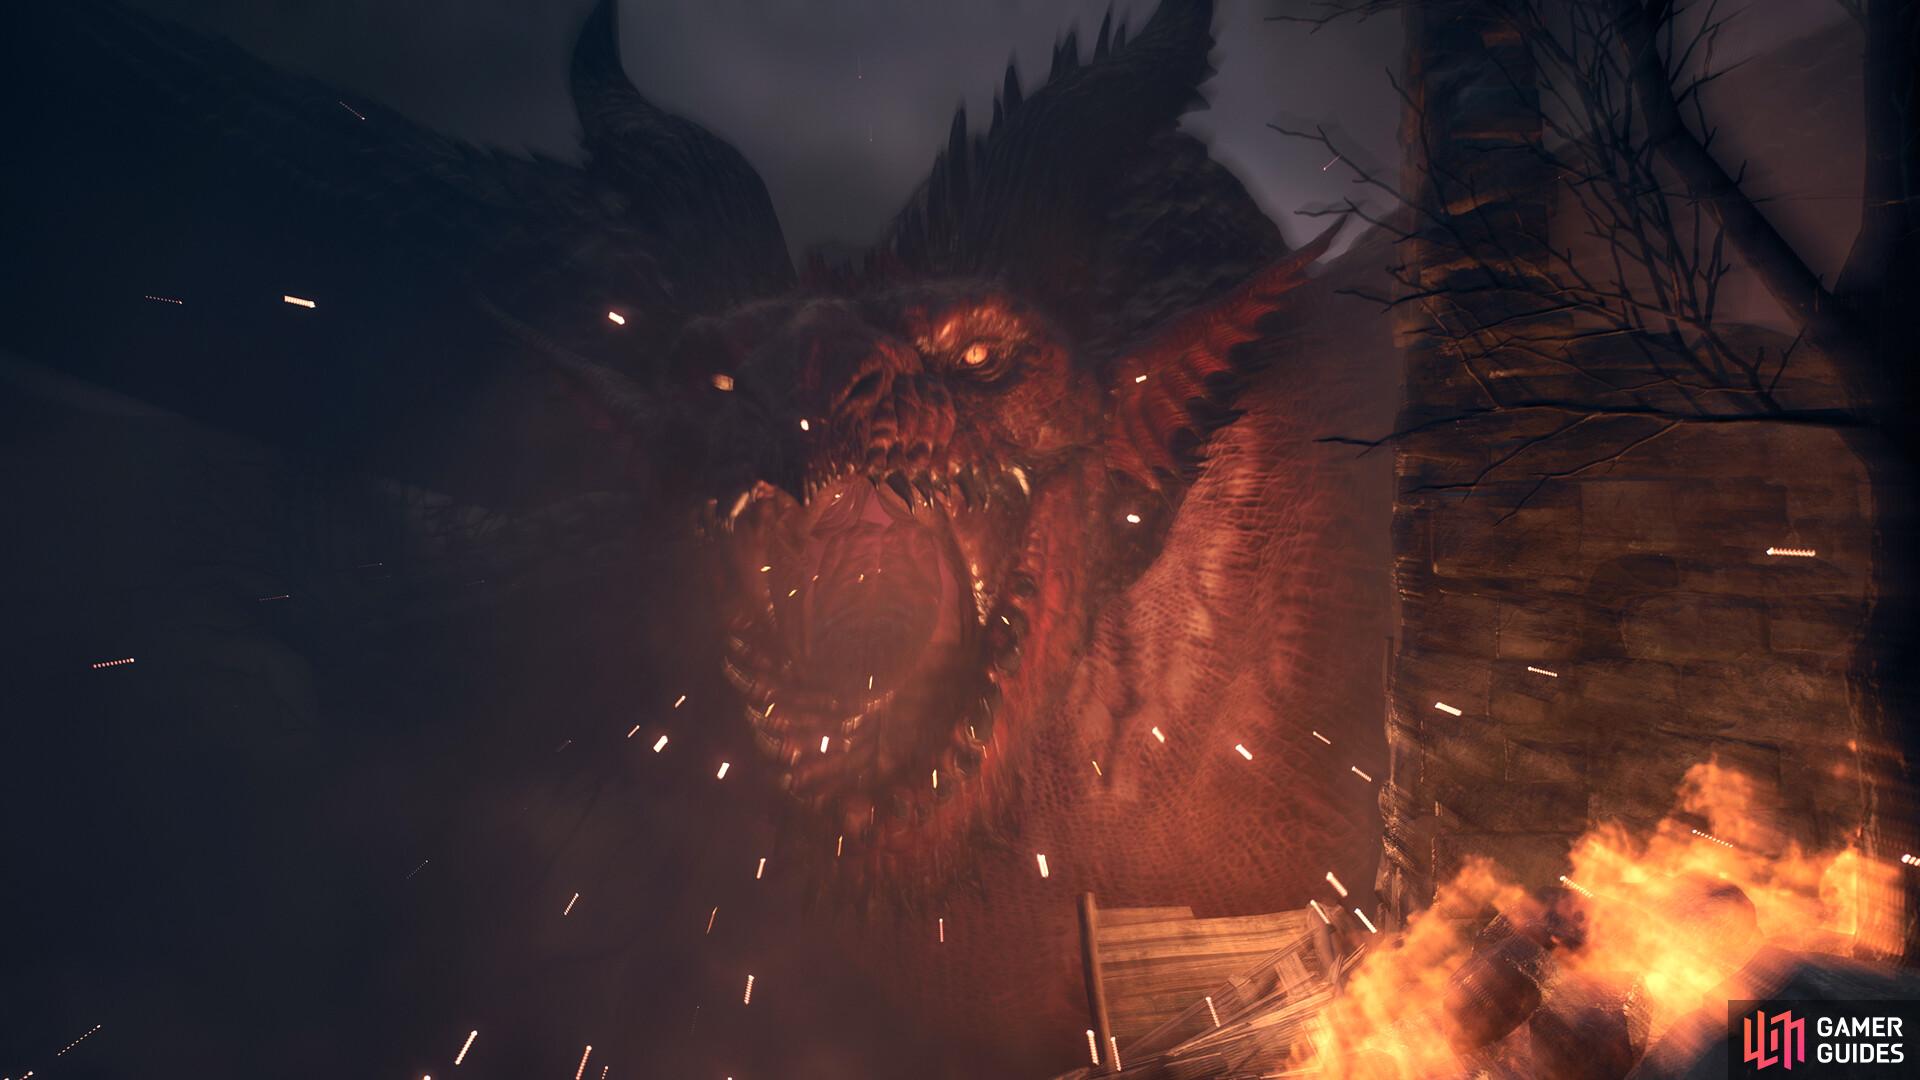 Capcom has heard the angry dragons and is working to resolve the missing new save feature for Dragon’s Dogma 2. Image via Capcom.